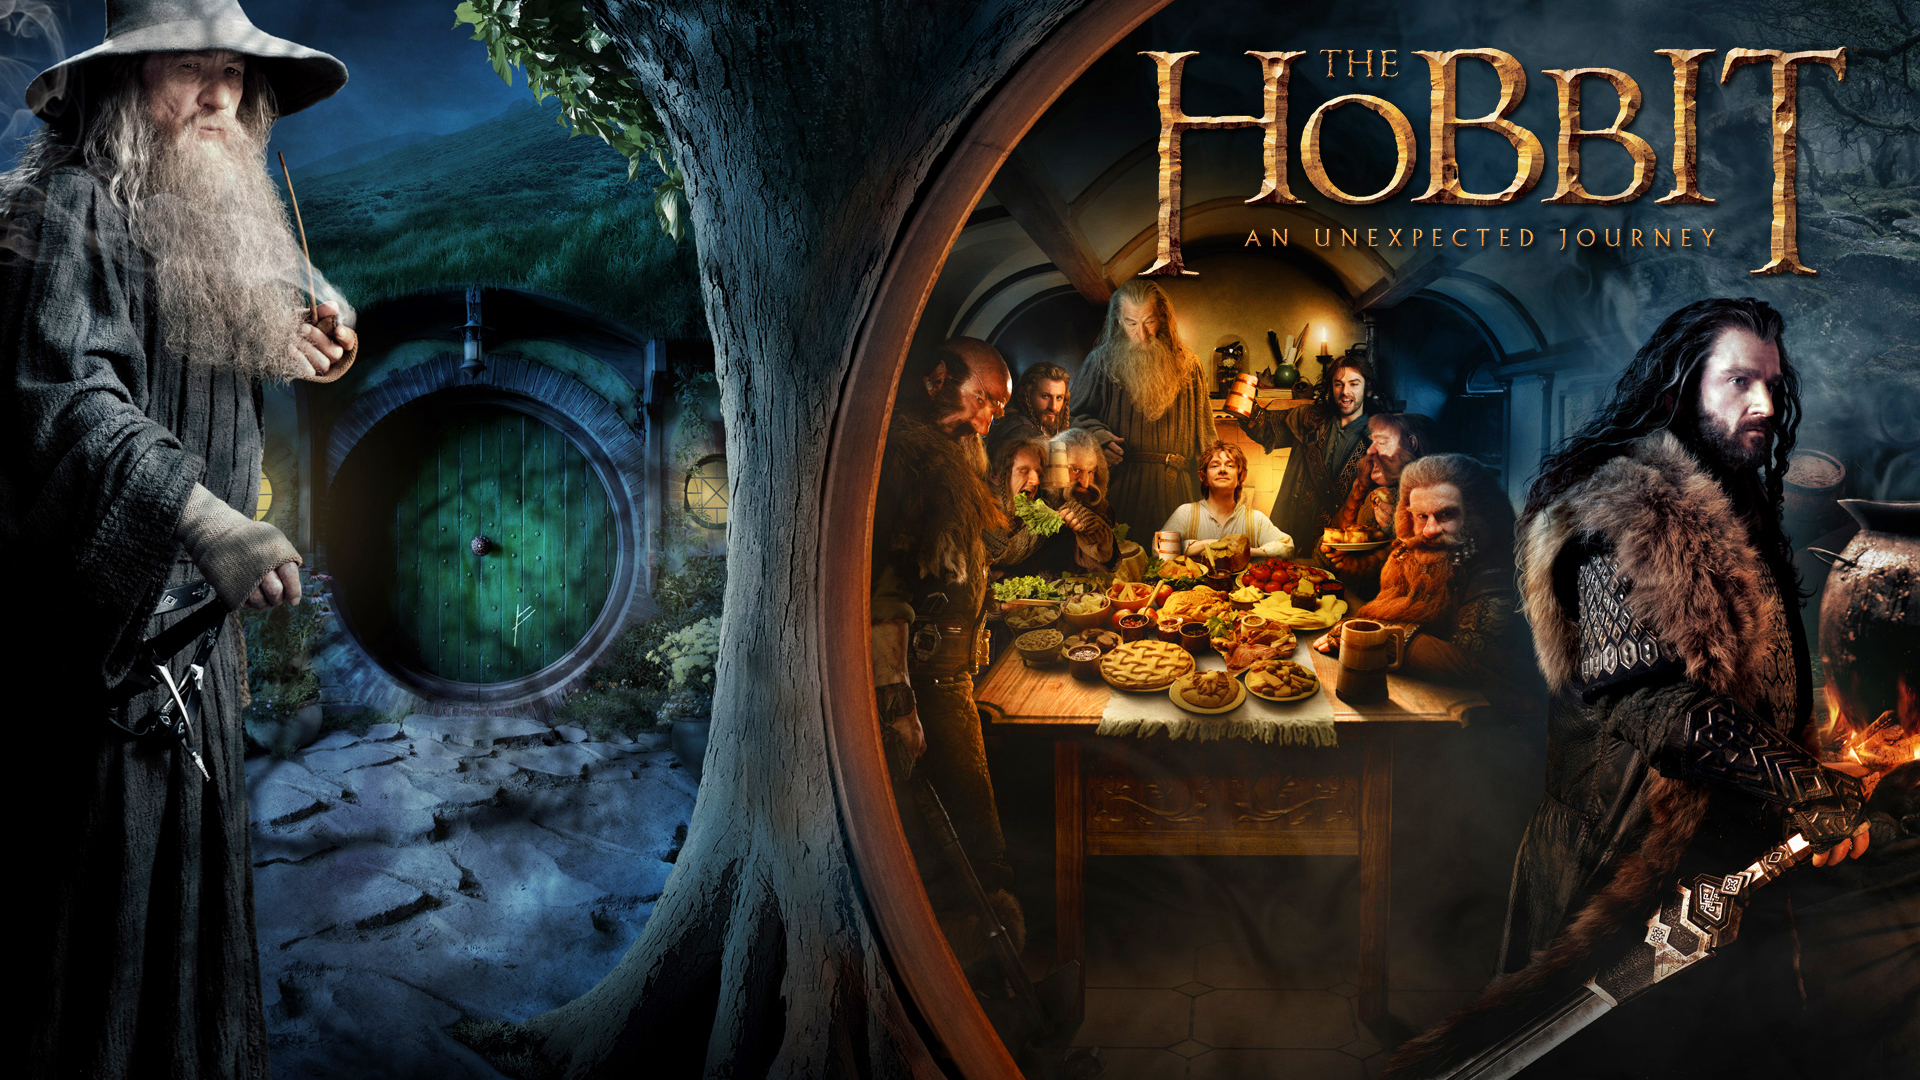 The Hobbit: An Unexpected Journey #7